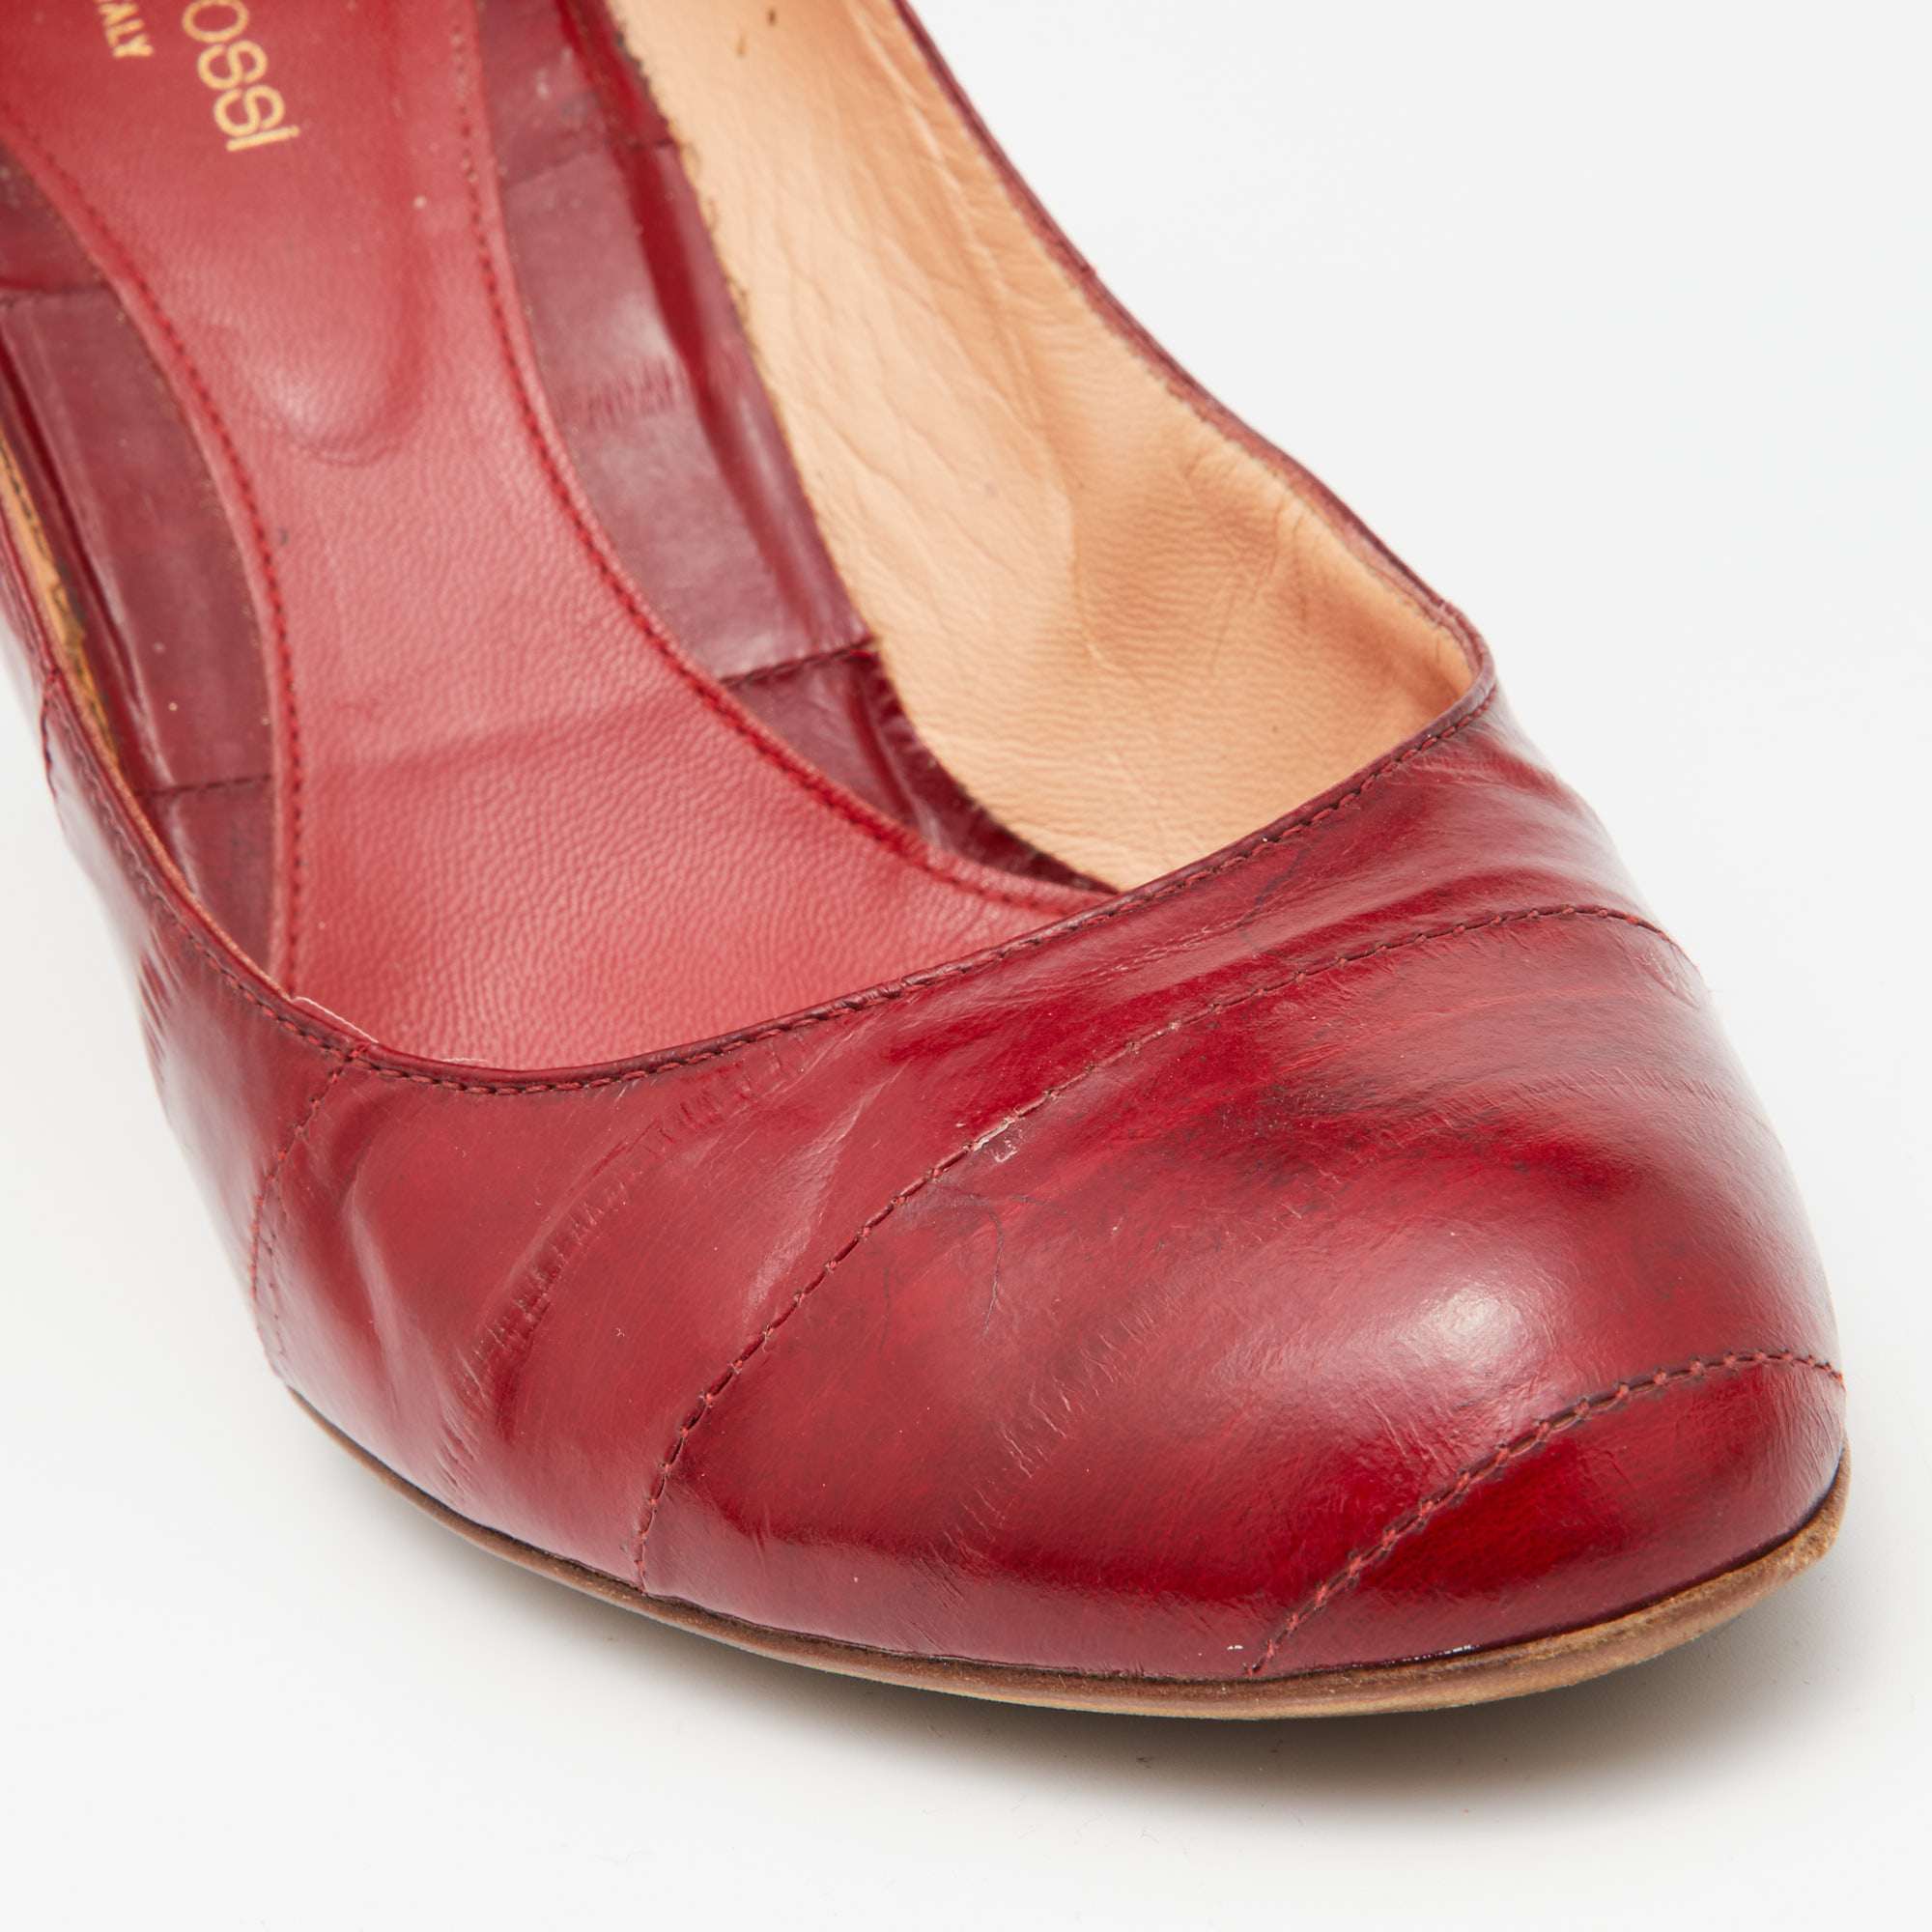 Sergio Rossi Red Eel Leather Round-Toe Pumps Size 39